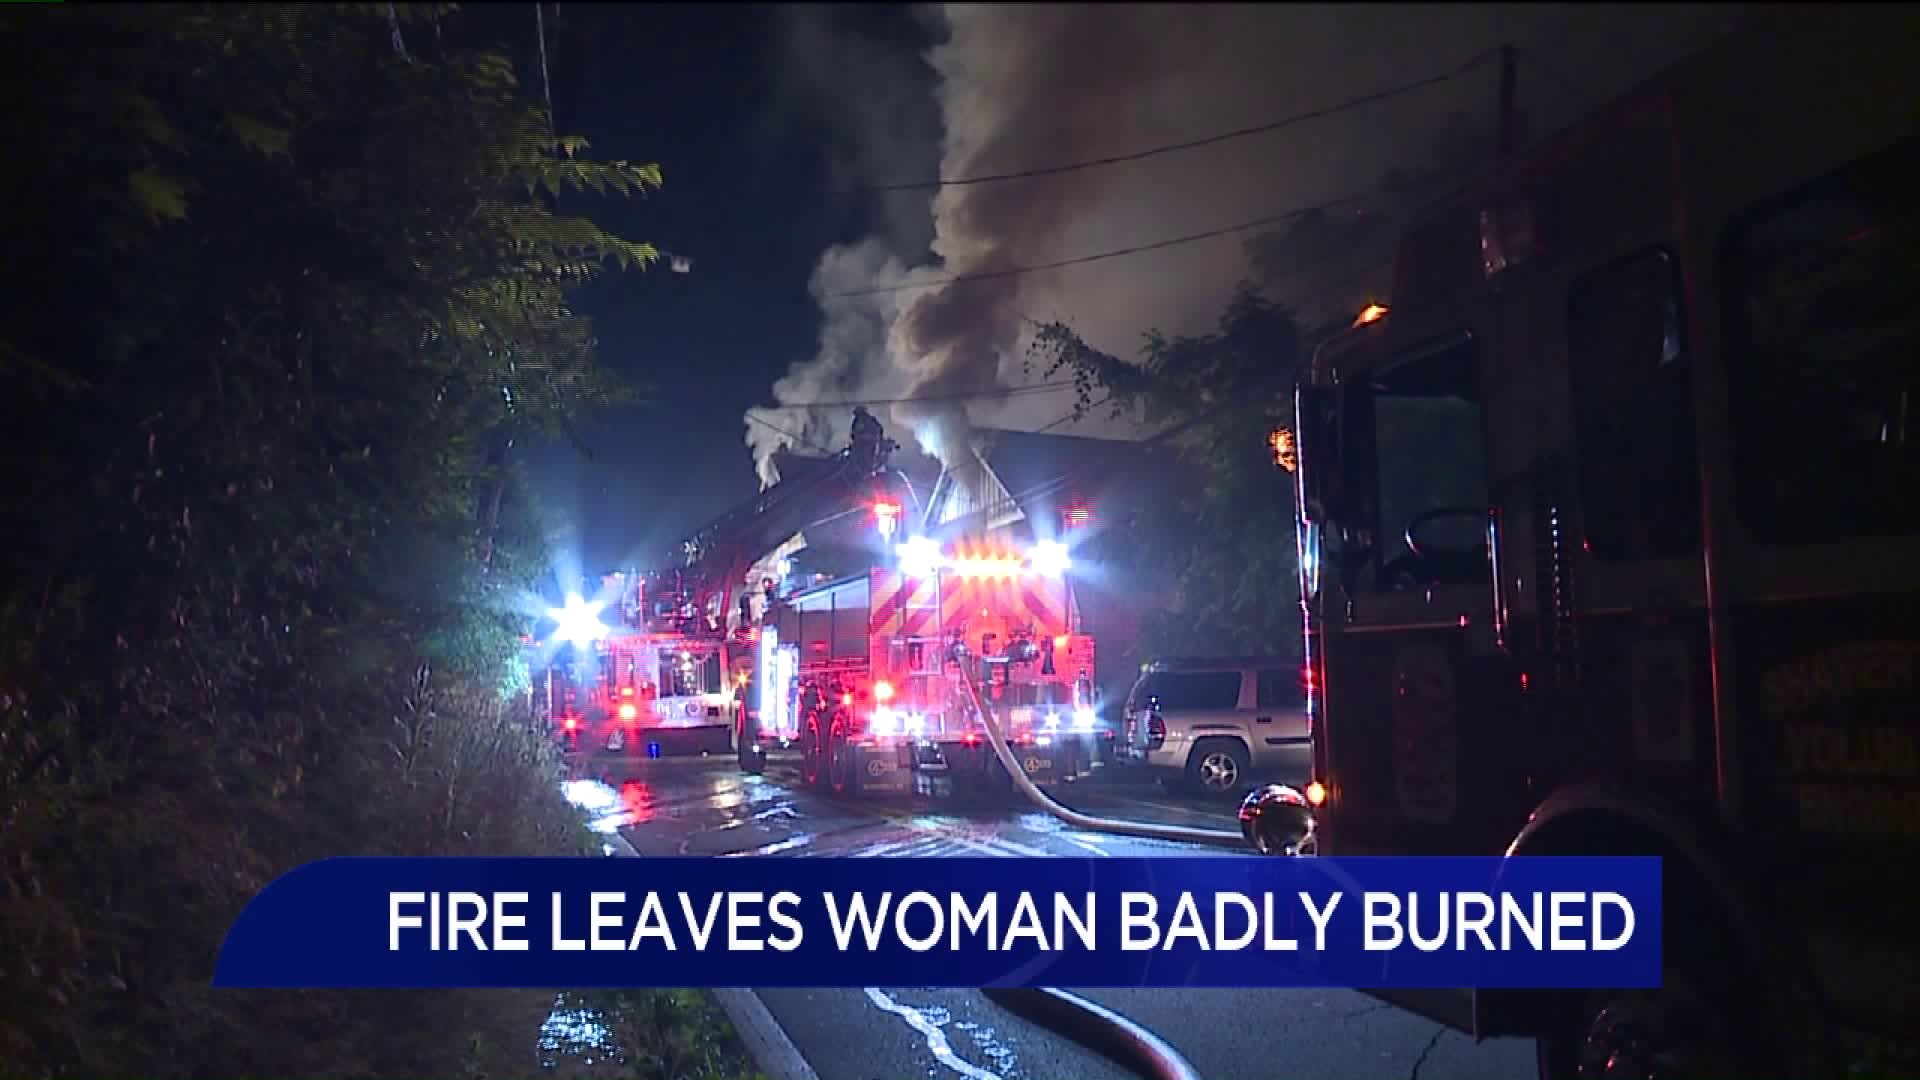 Two Homes Destroyed, Woman Badly Burned in Dallas Fire